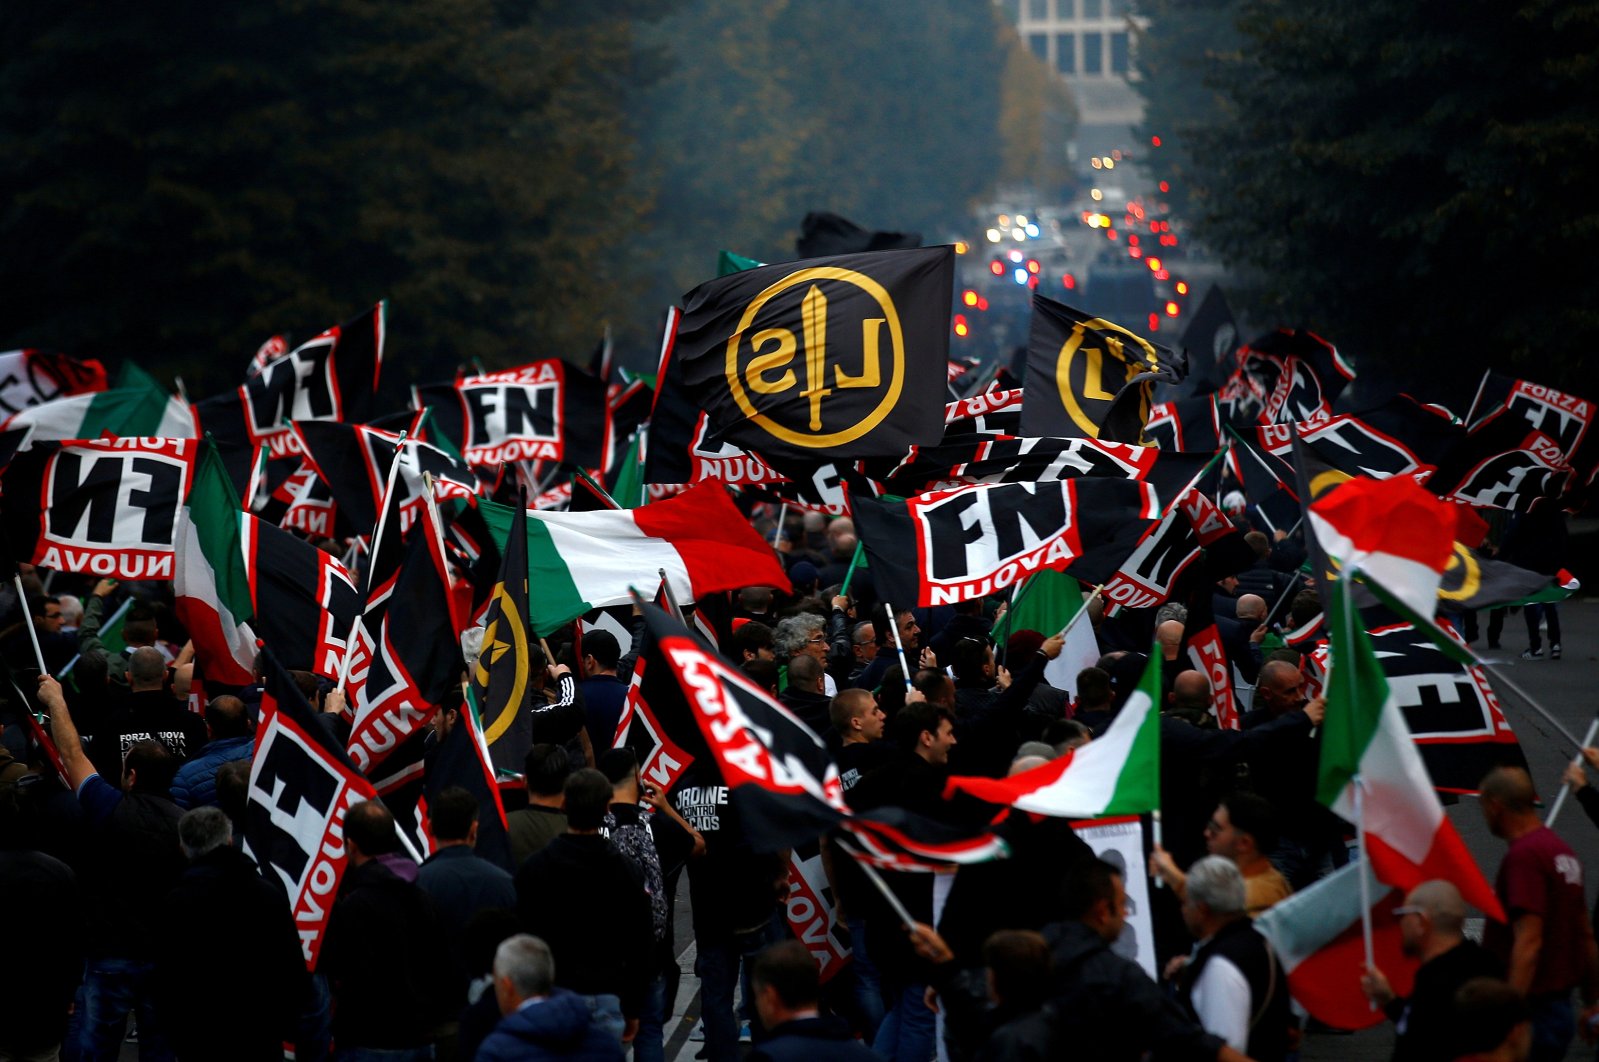 Supporters of Italy's far-right Forza Nuova party wave flags during a demonstration in Rome, Italy, Nov. 4, 2017. (Reuters Photo)